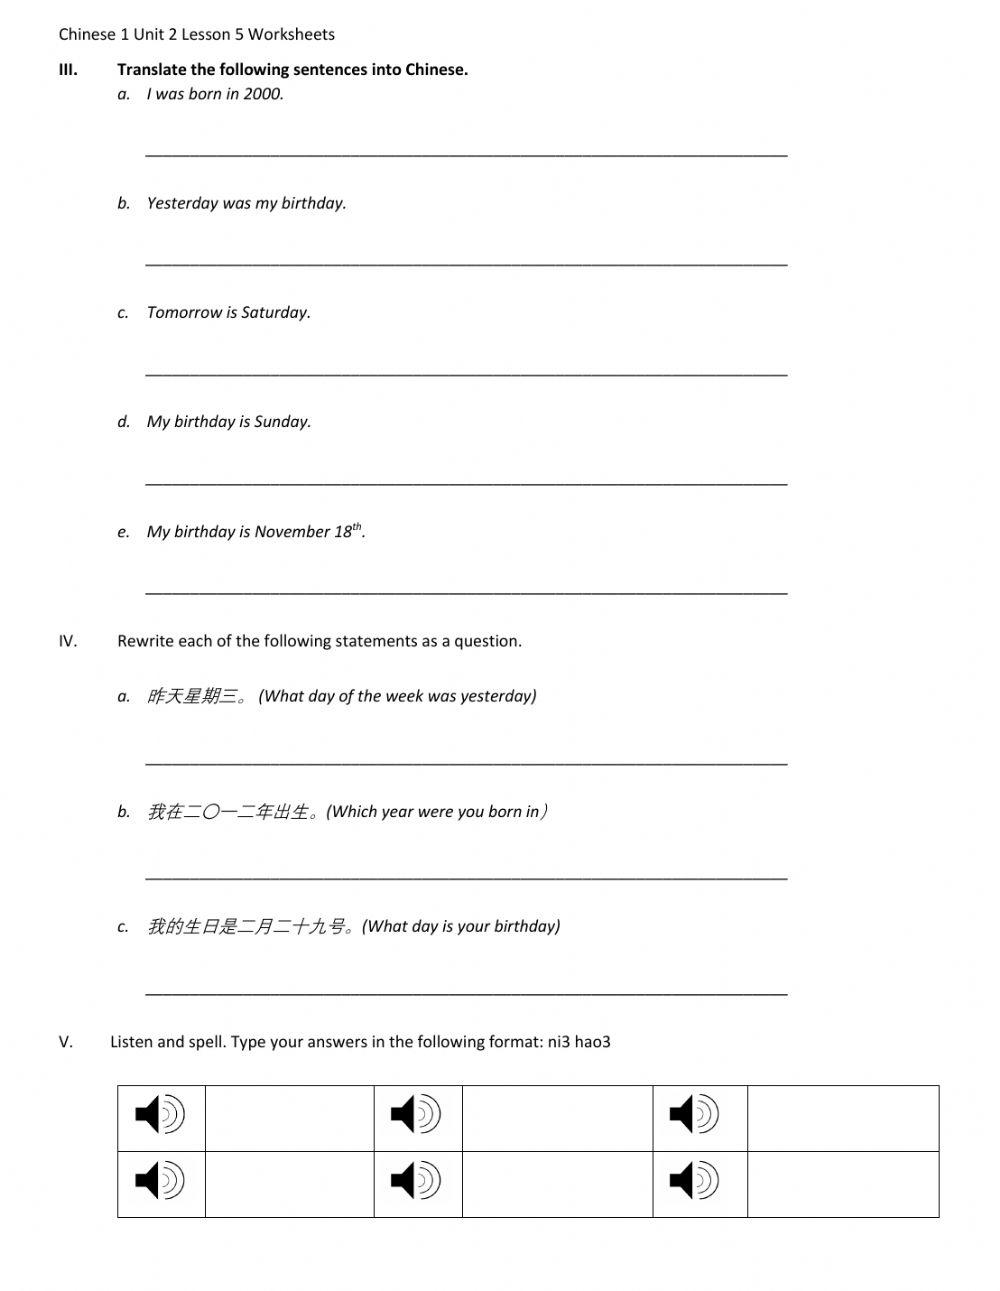 Chinese 1 Lesson 5